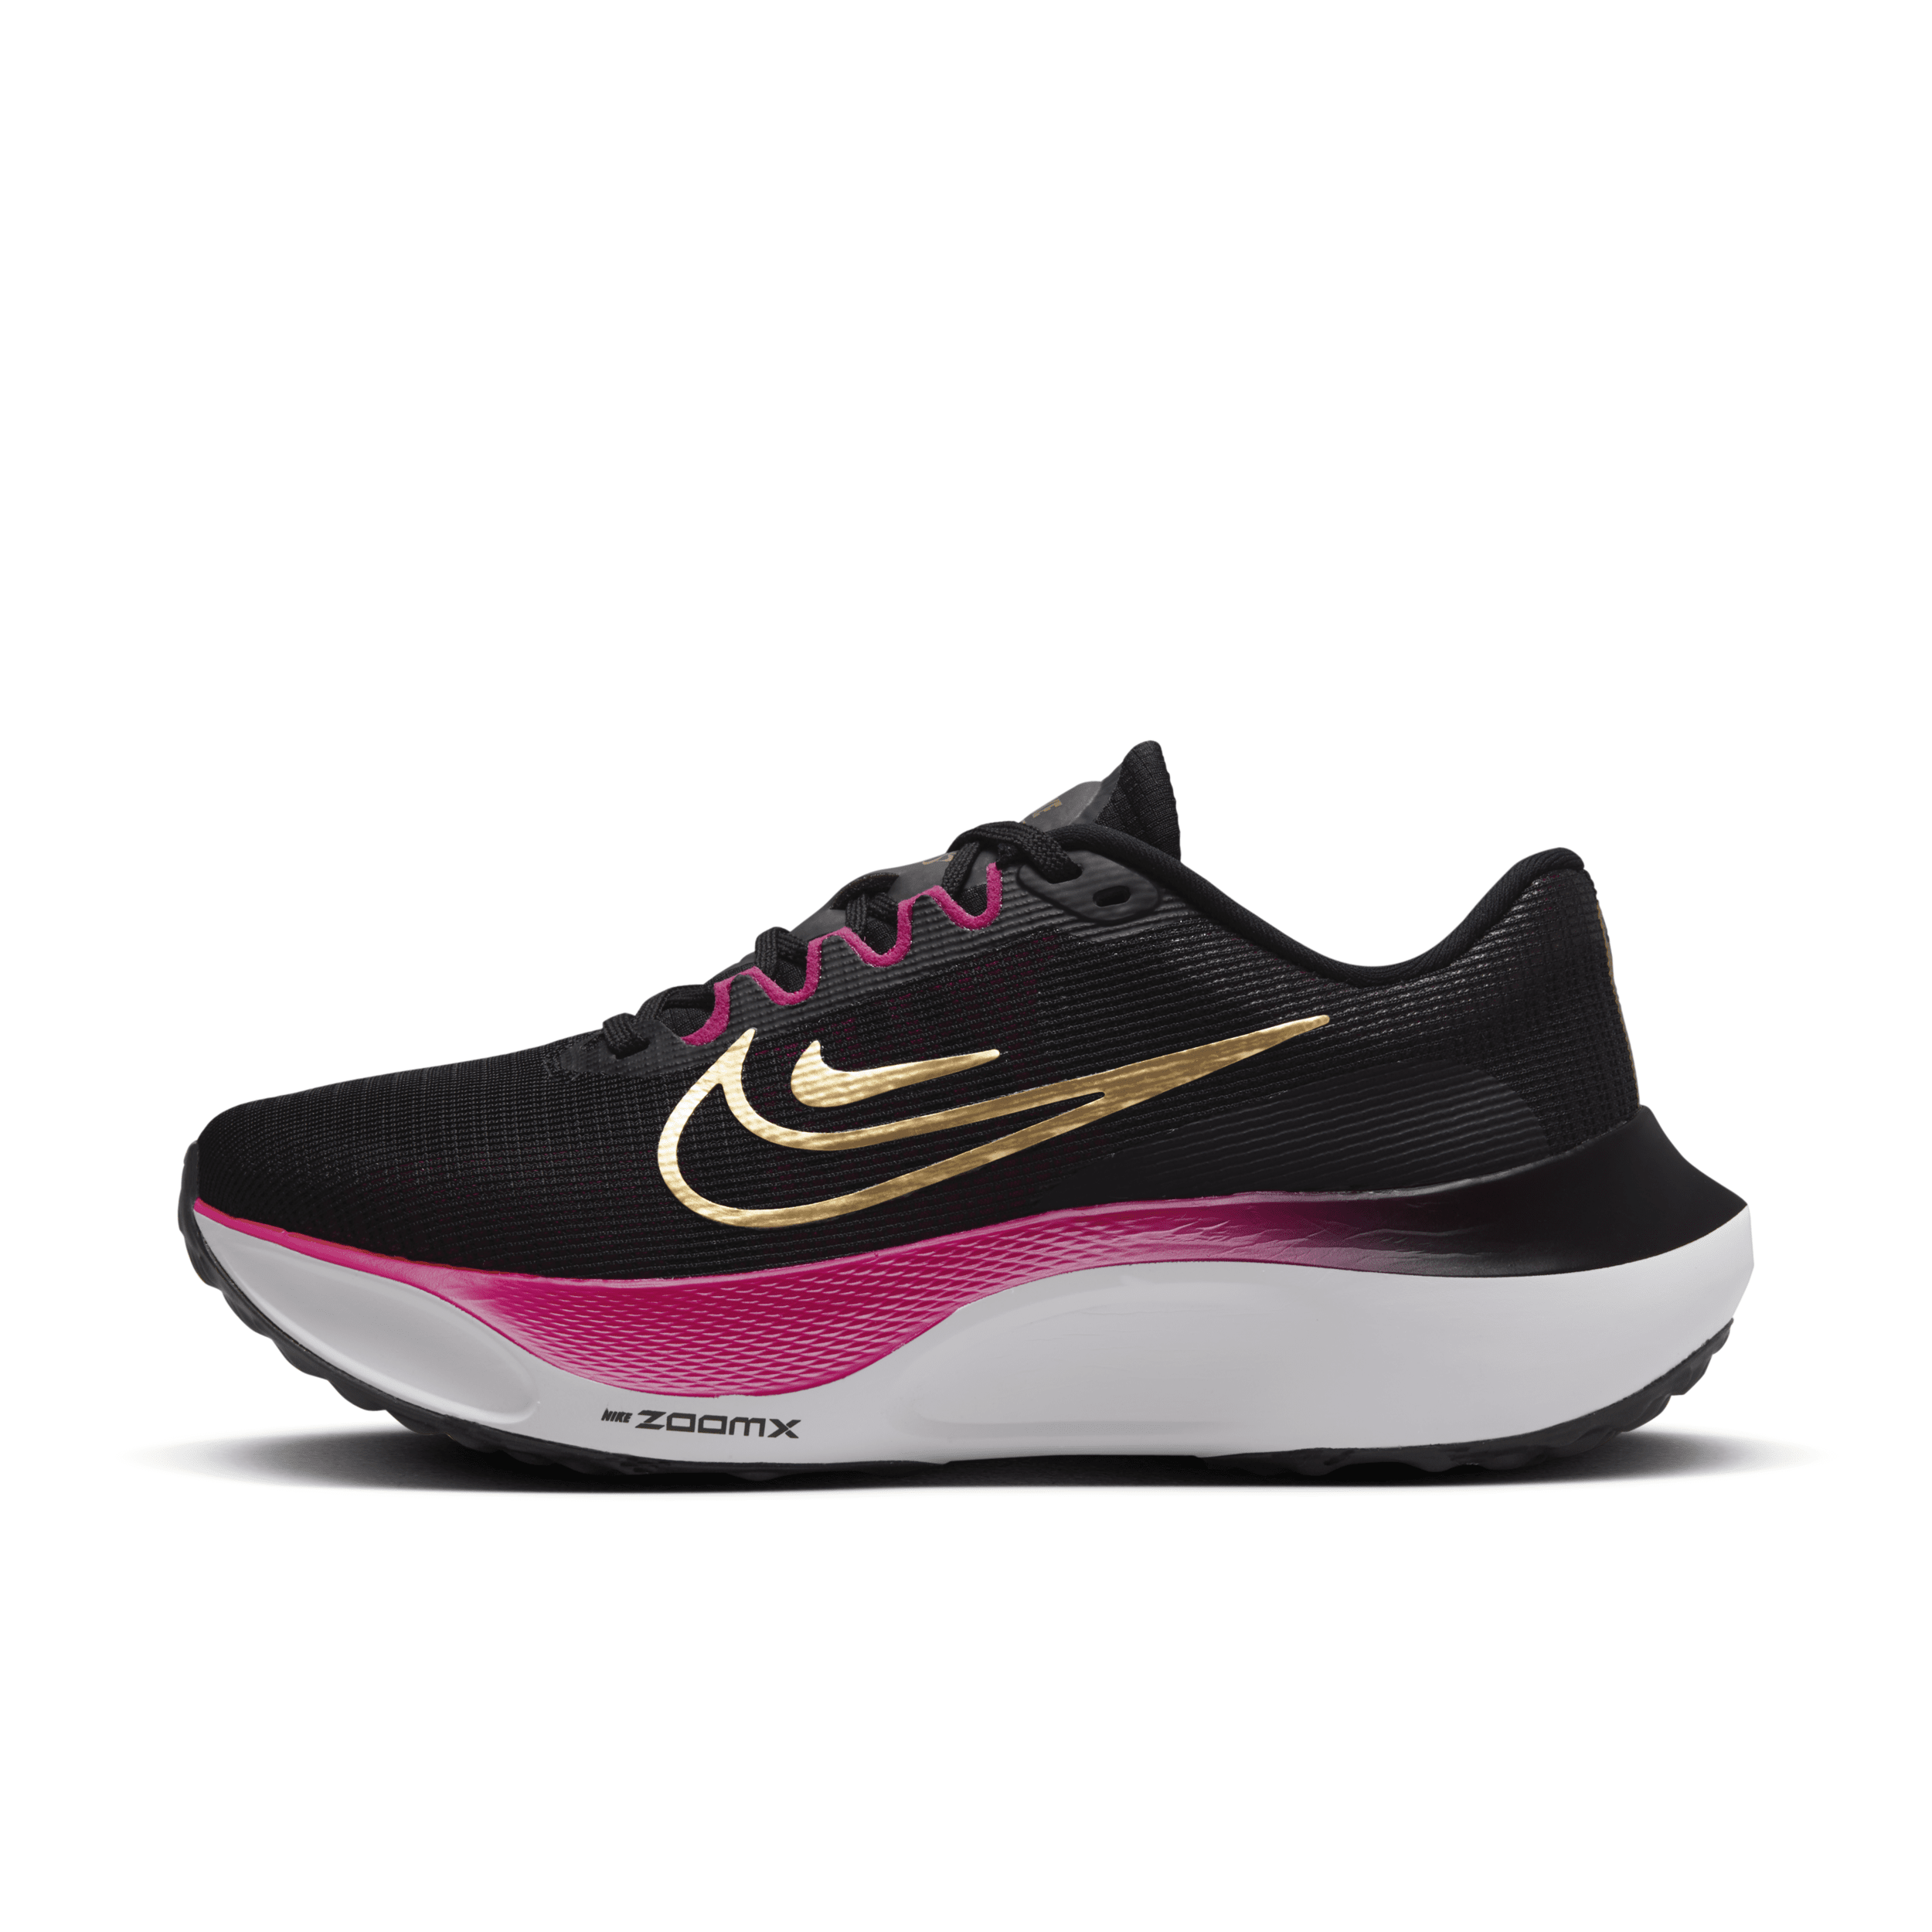 NIKE WOMEN'S ZOOM FLY 5 ROAD RUNNING SHOES,1012889266